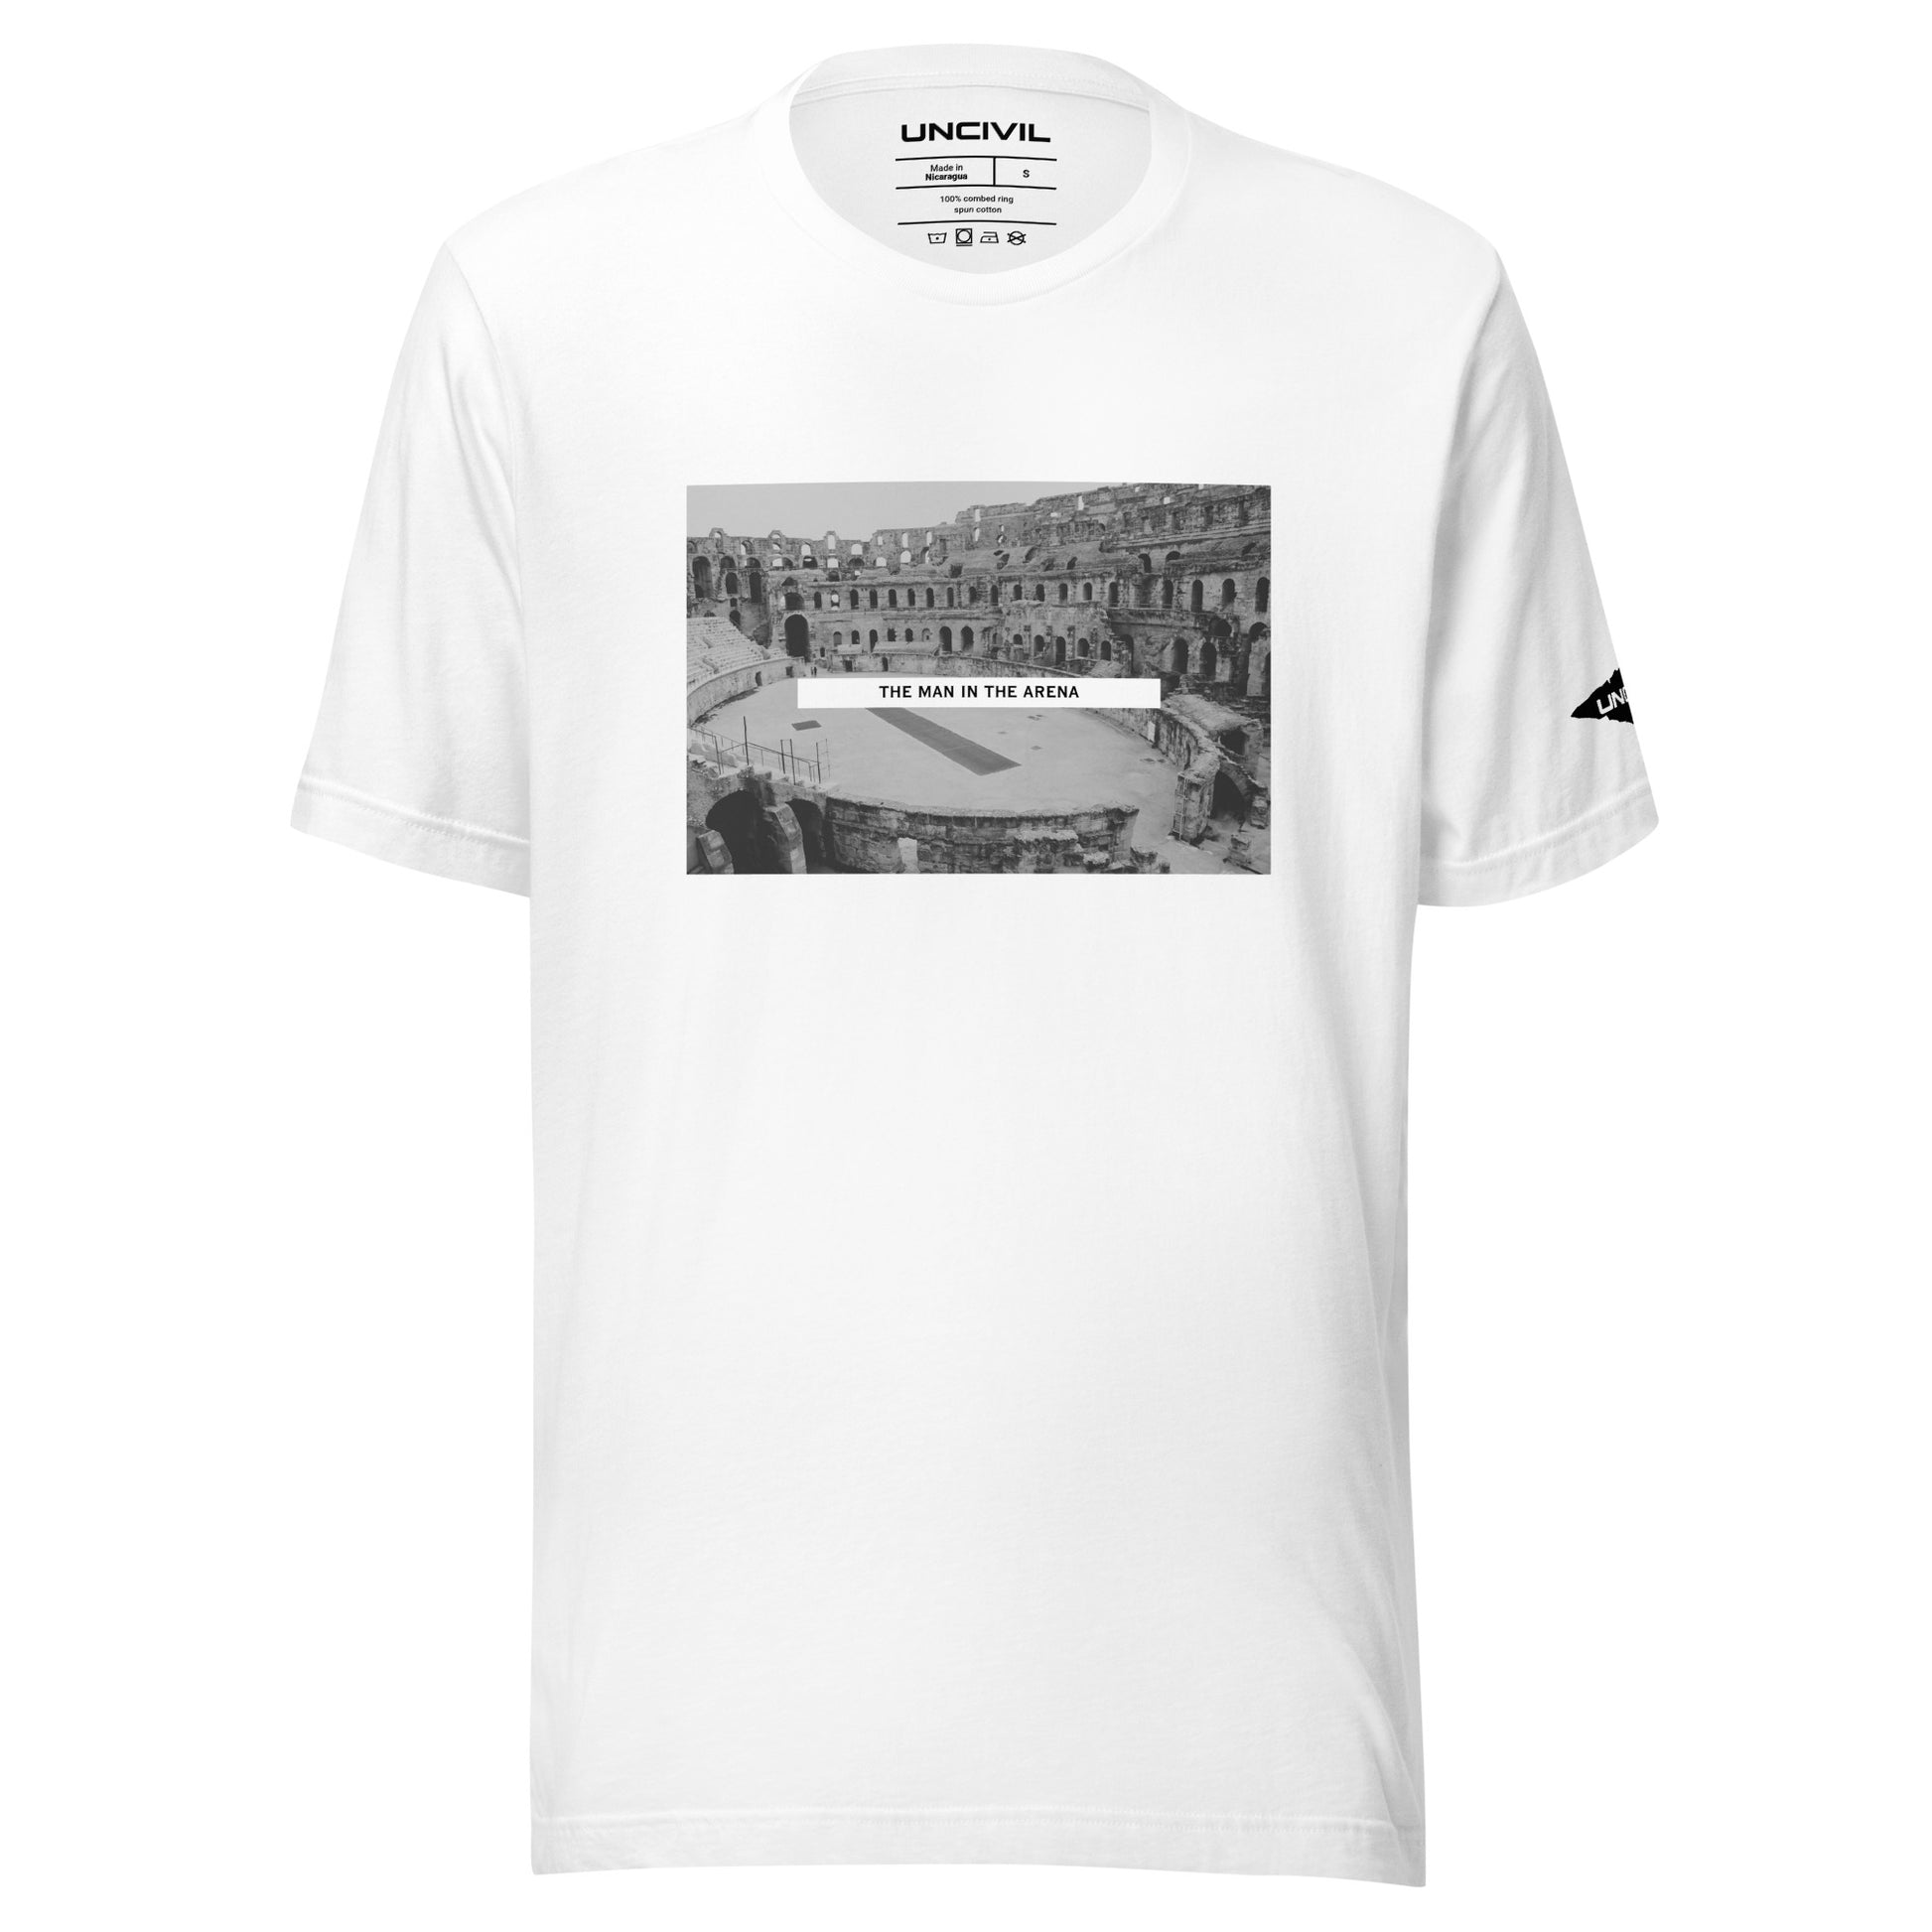 Man in the Arena t-shirt. Inspired by Theodore Roosevelt's Citizenship in a Republic speech, White graphic shirt.